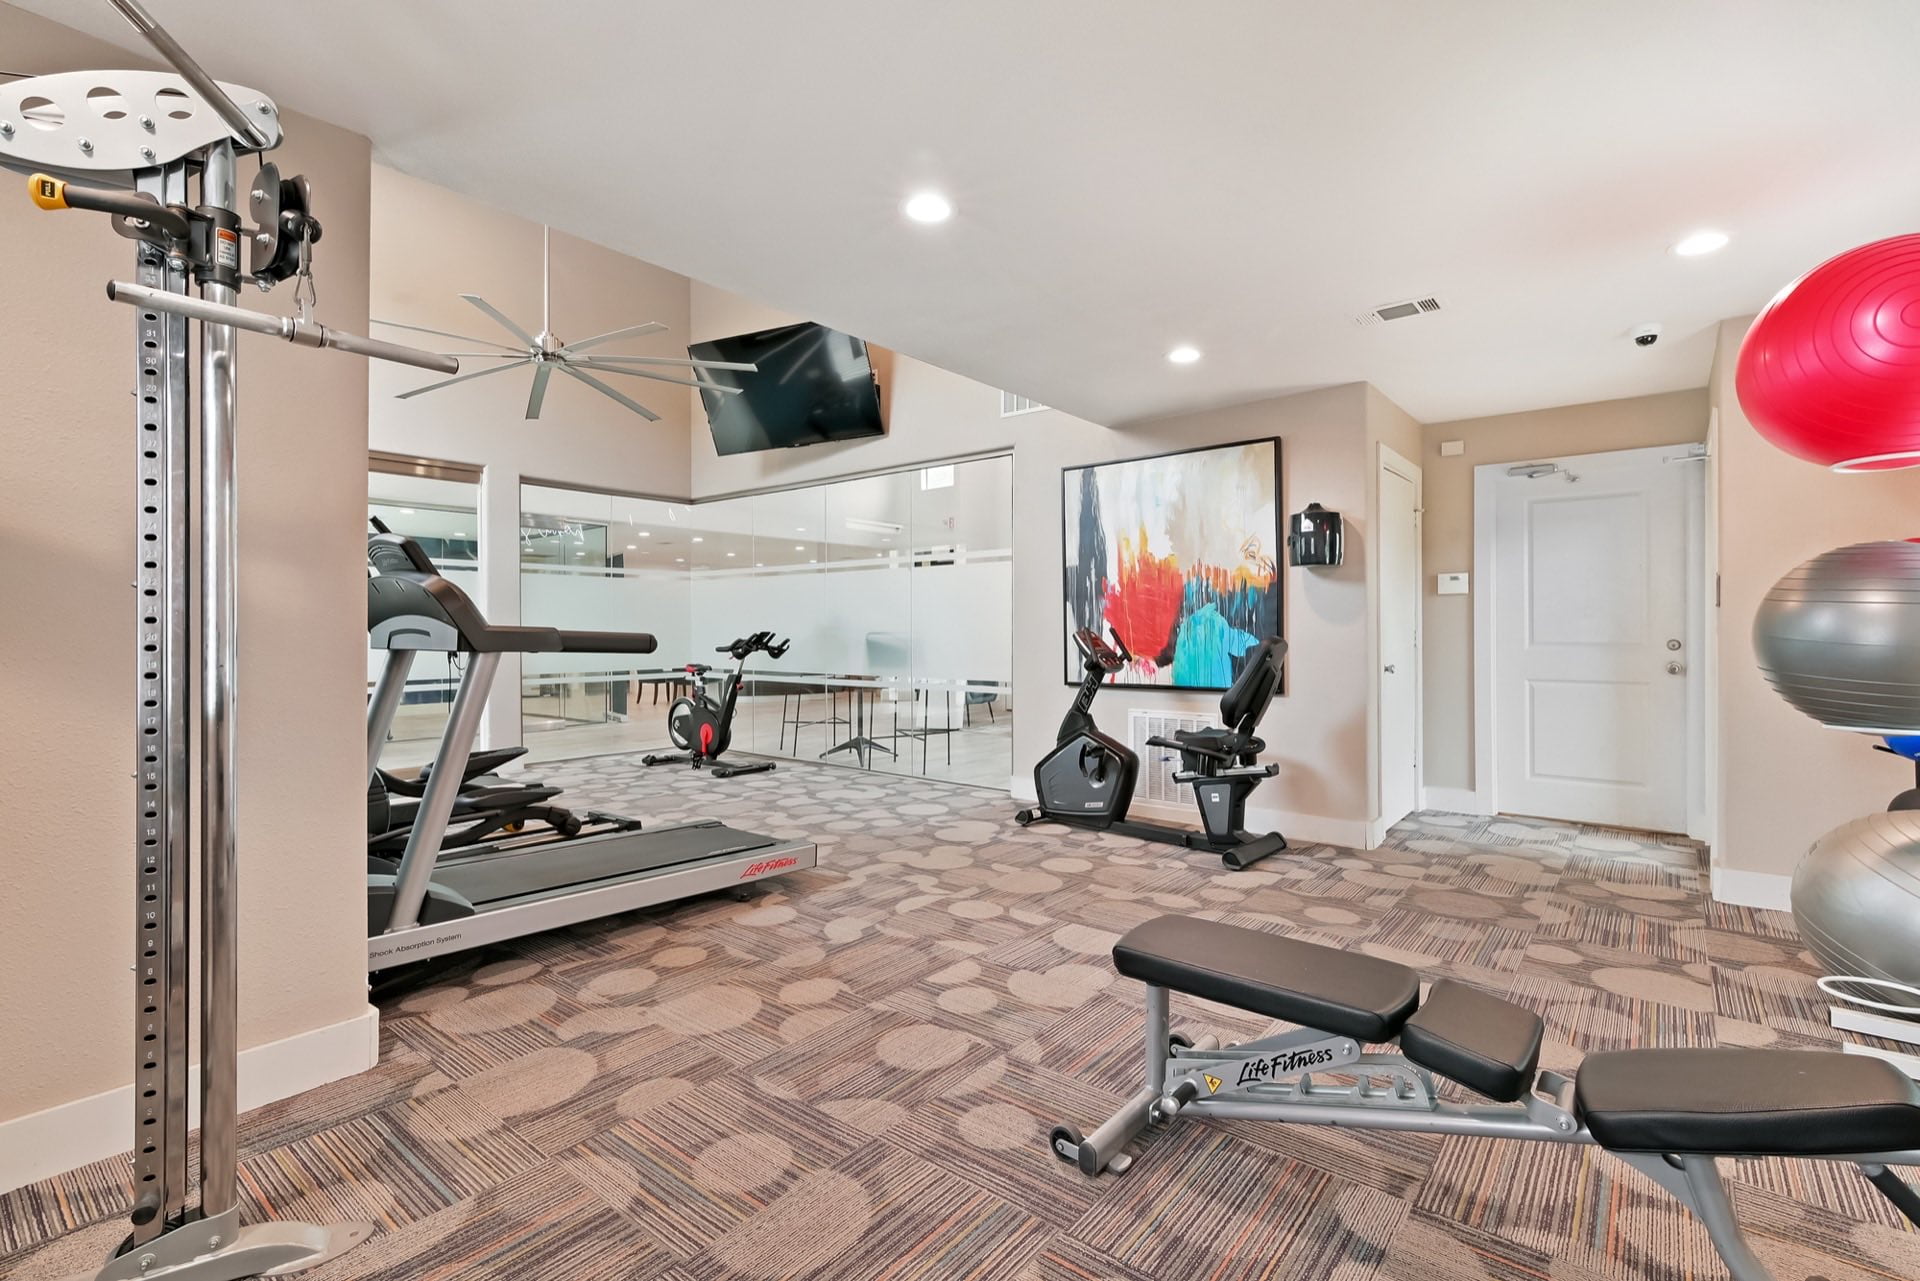 Fitness center with modern machines and equipment